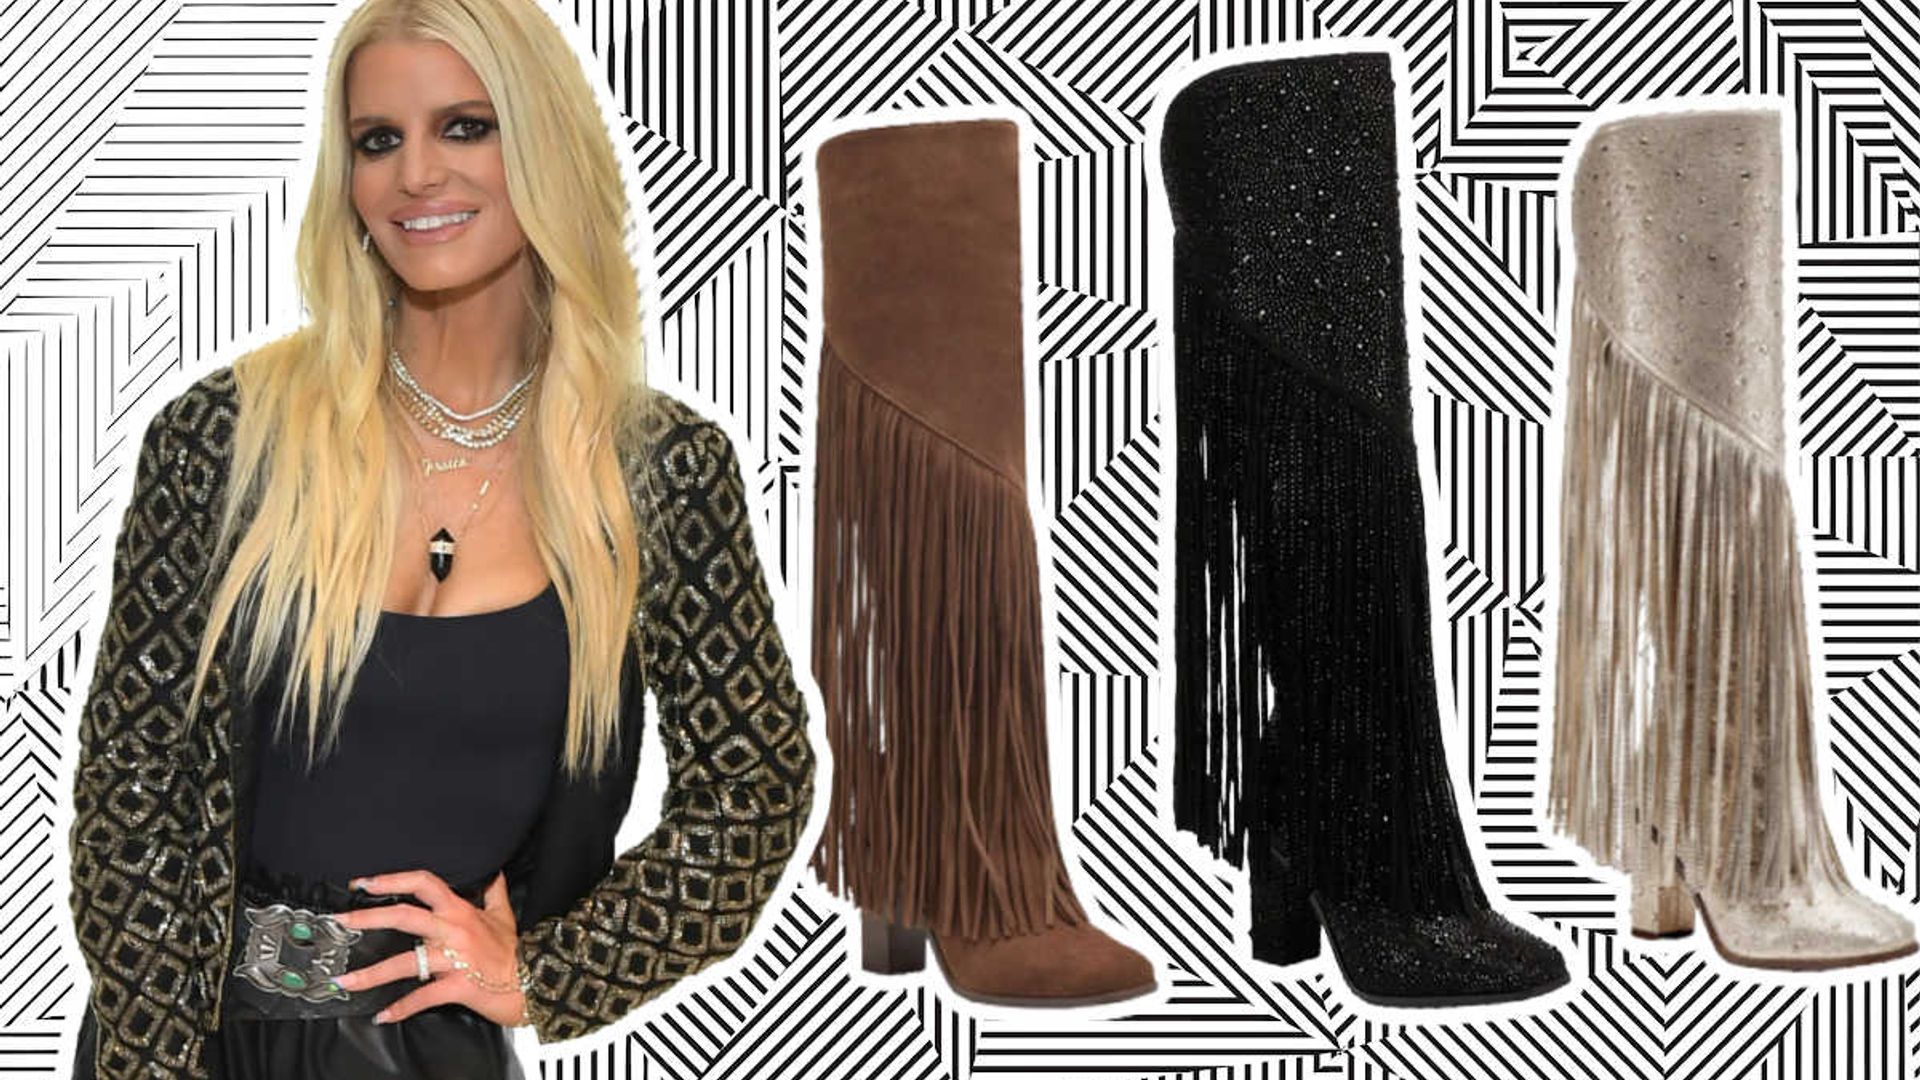 Jessica Simpson channels Daisy Duke in fringed suede shorts and cowboy boots